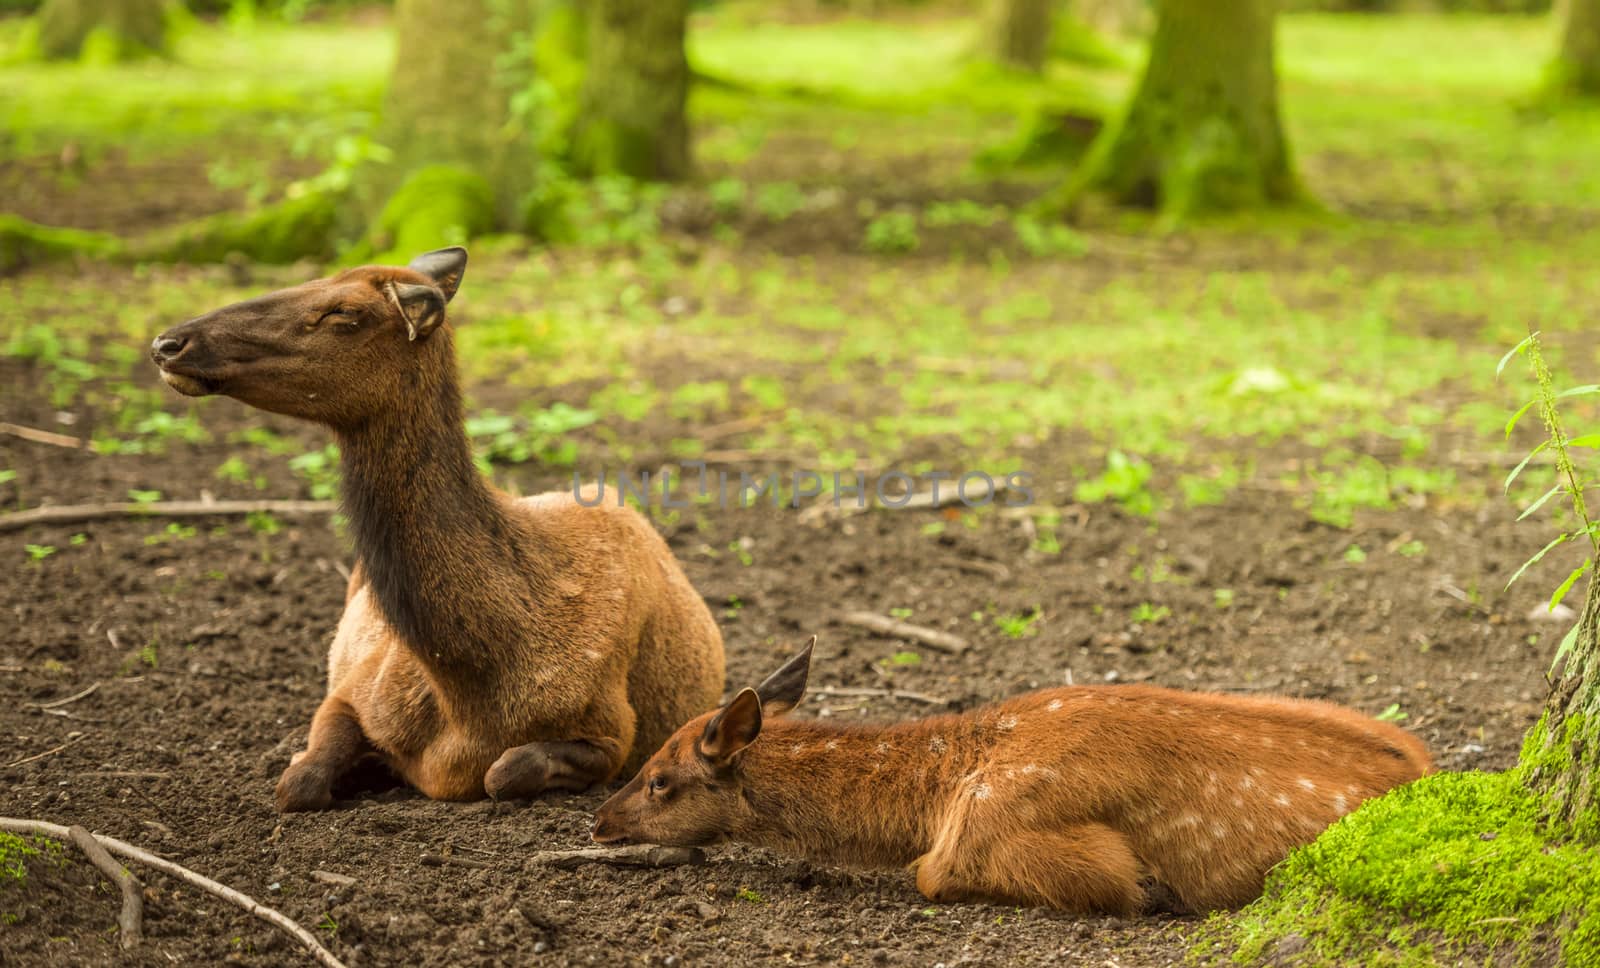 Red deer baby and its mother by YesPhotographers